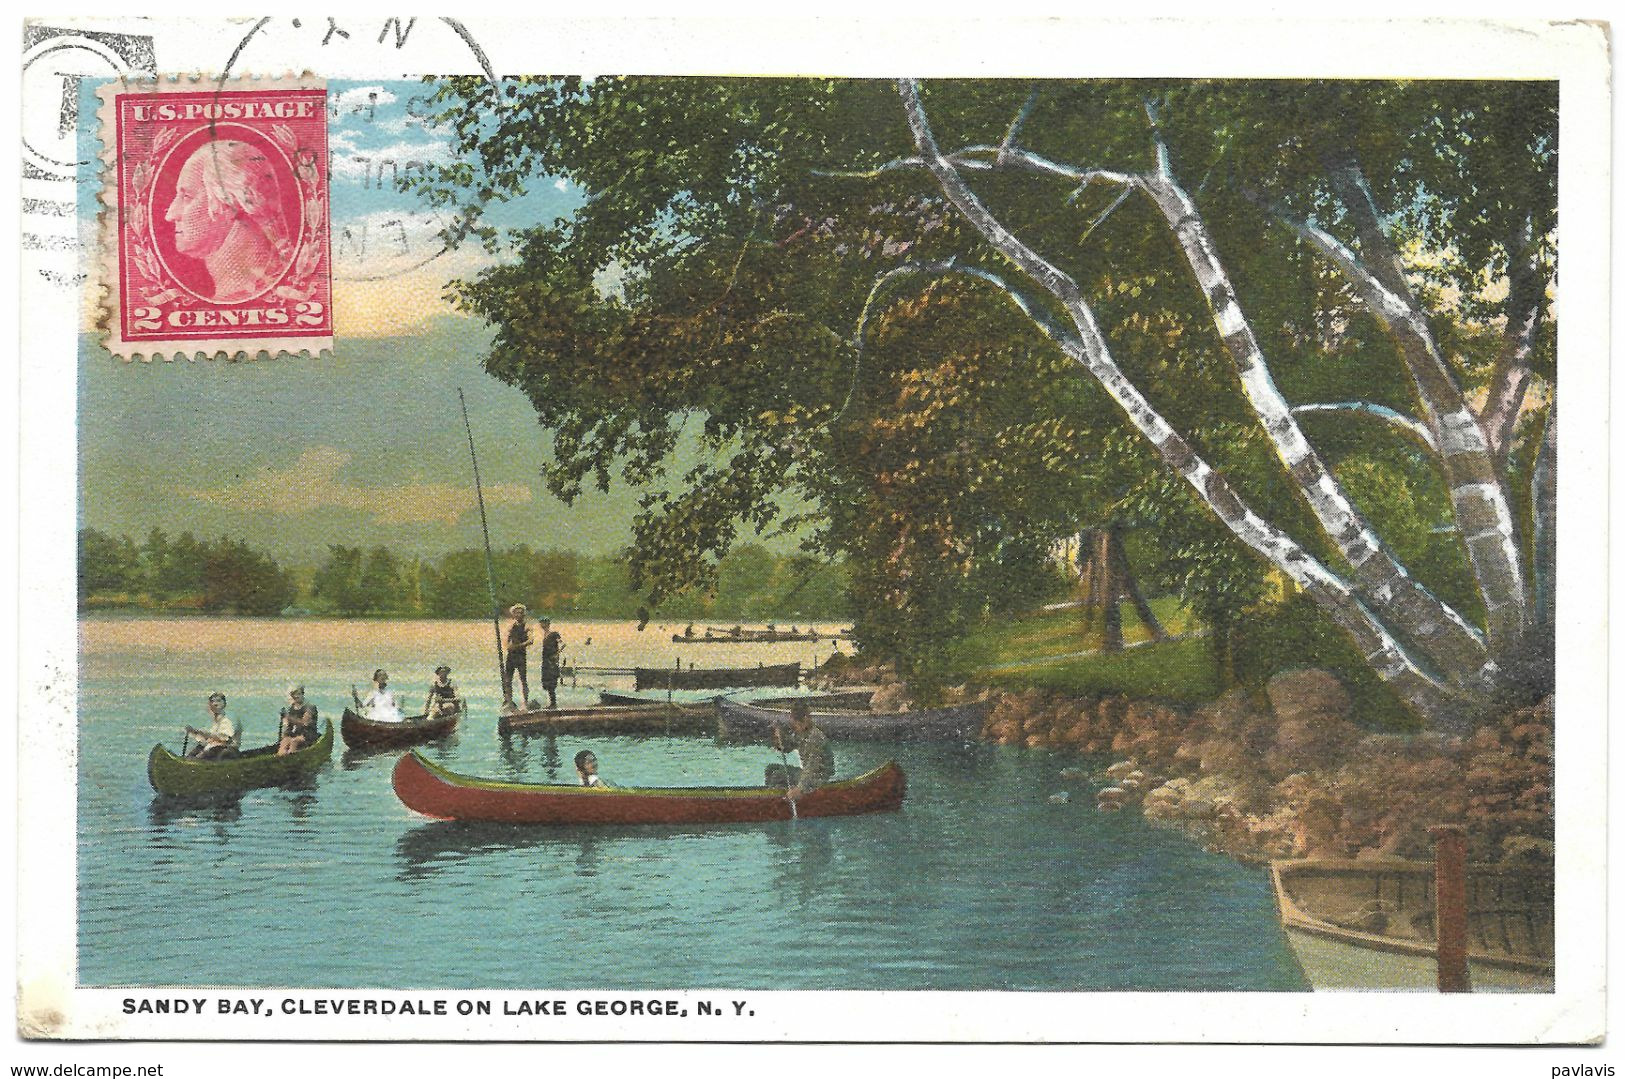 USA – Sandy Bay, Cleverdale On Lake George – New York – A Stamp 2 Cents – Year 1922 - Hudson River